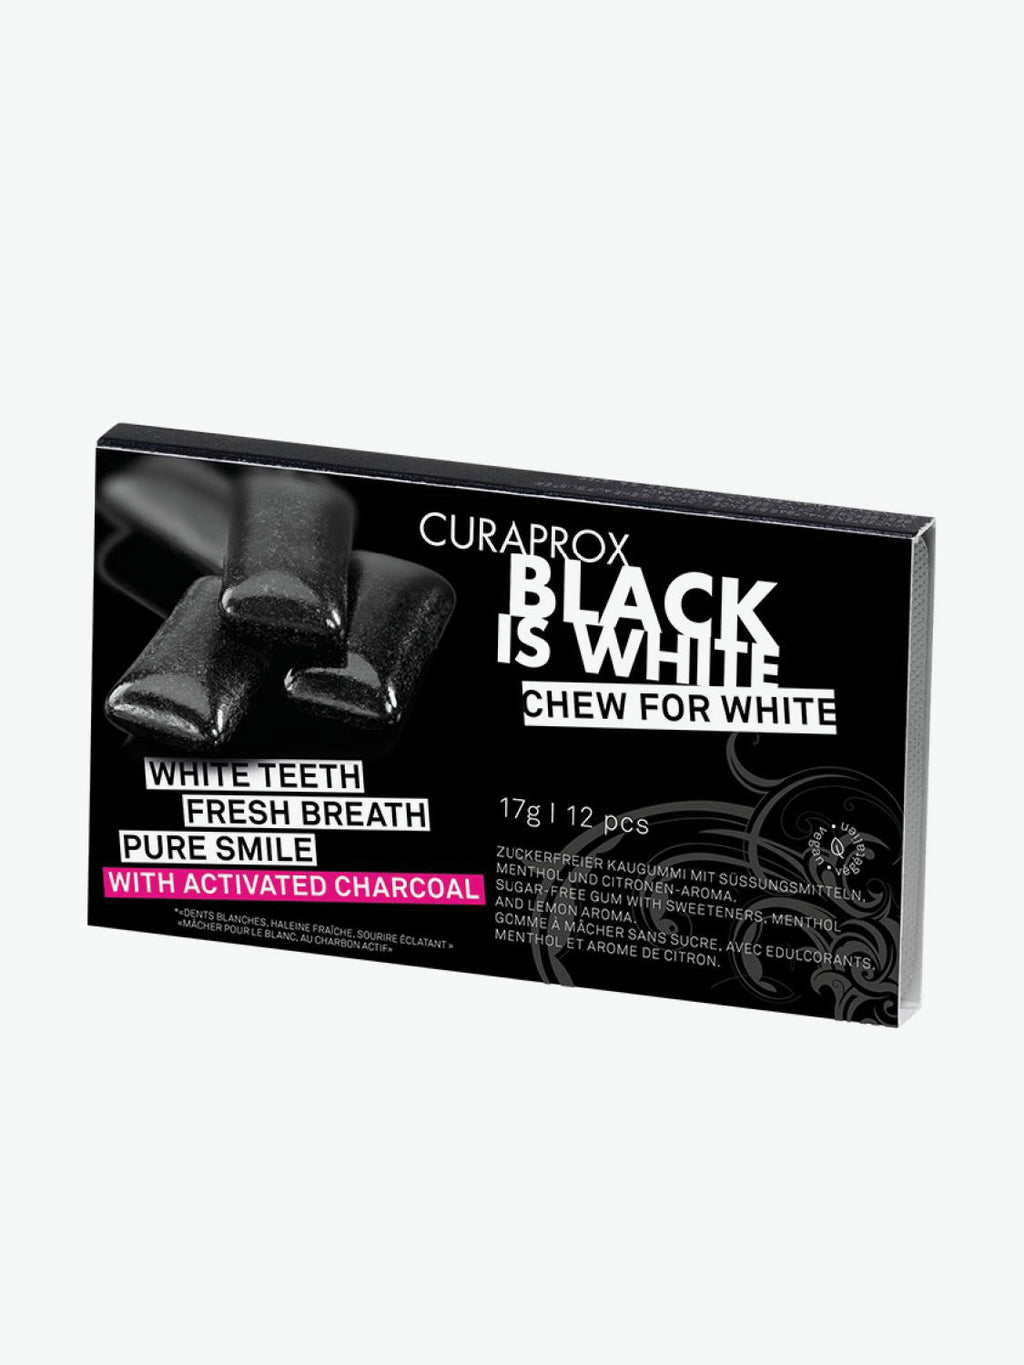 Curaprox Black Is White Chewing Gum | B